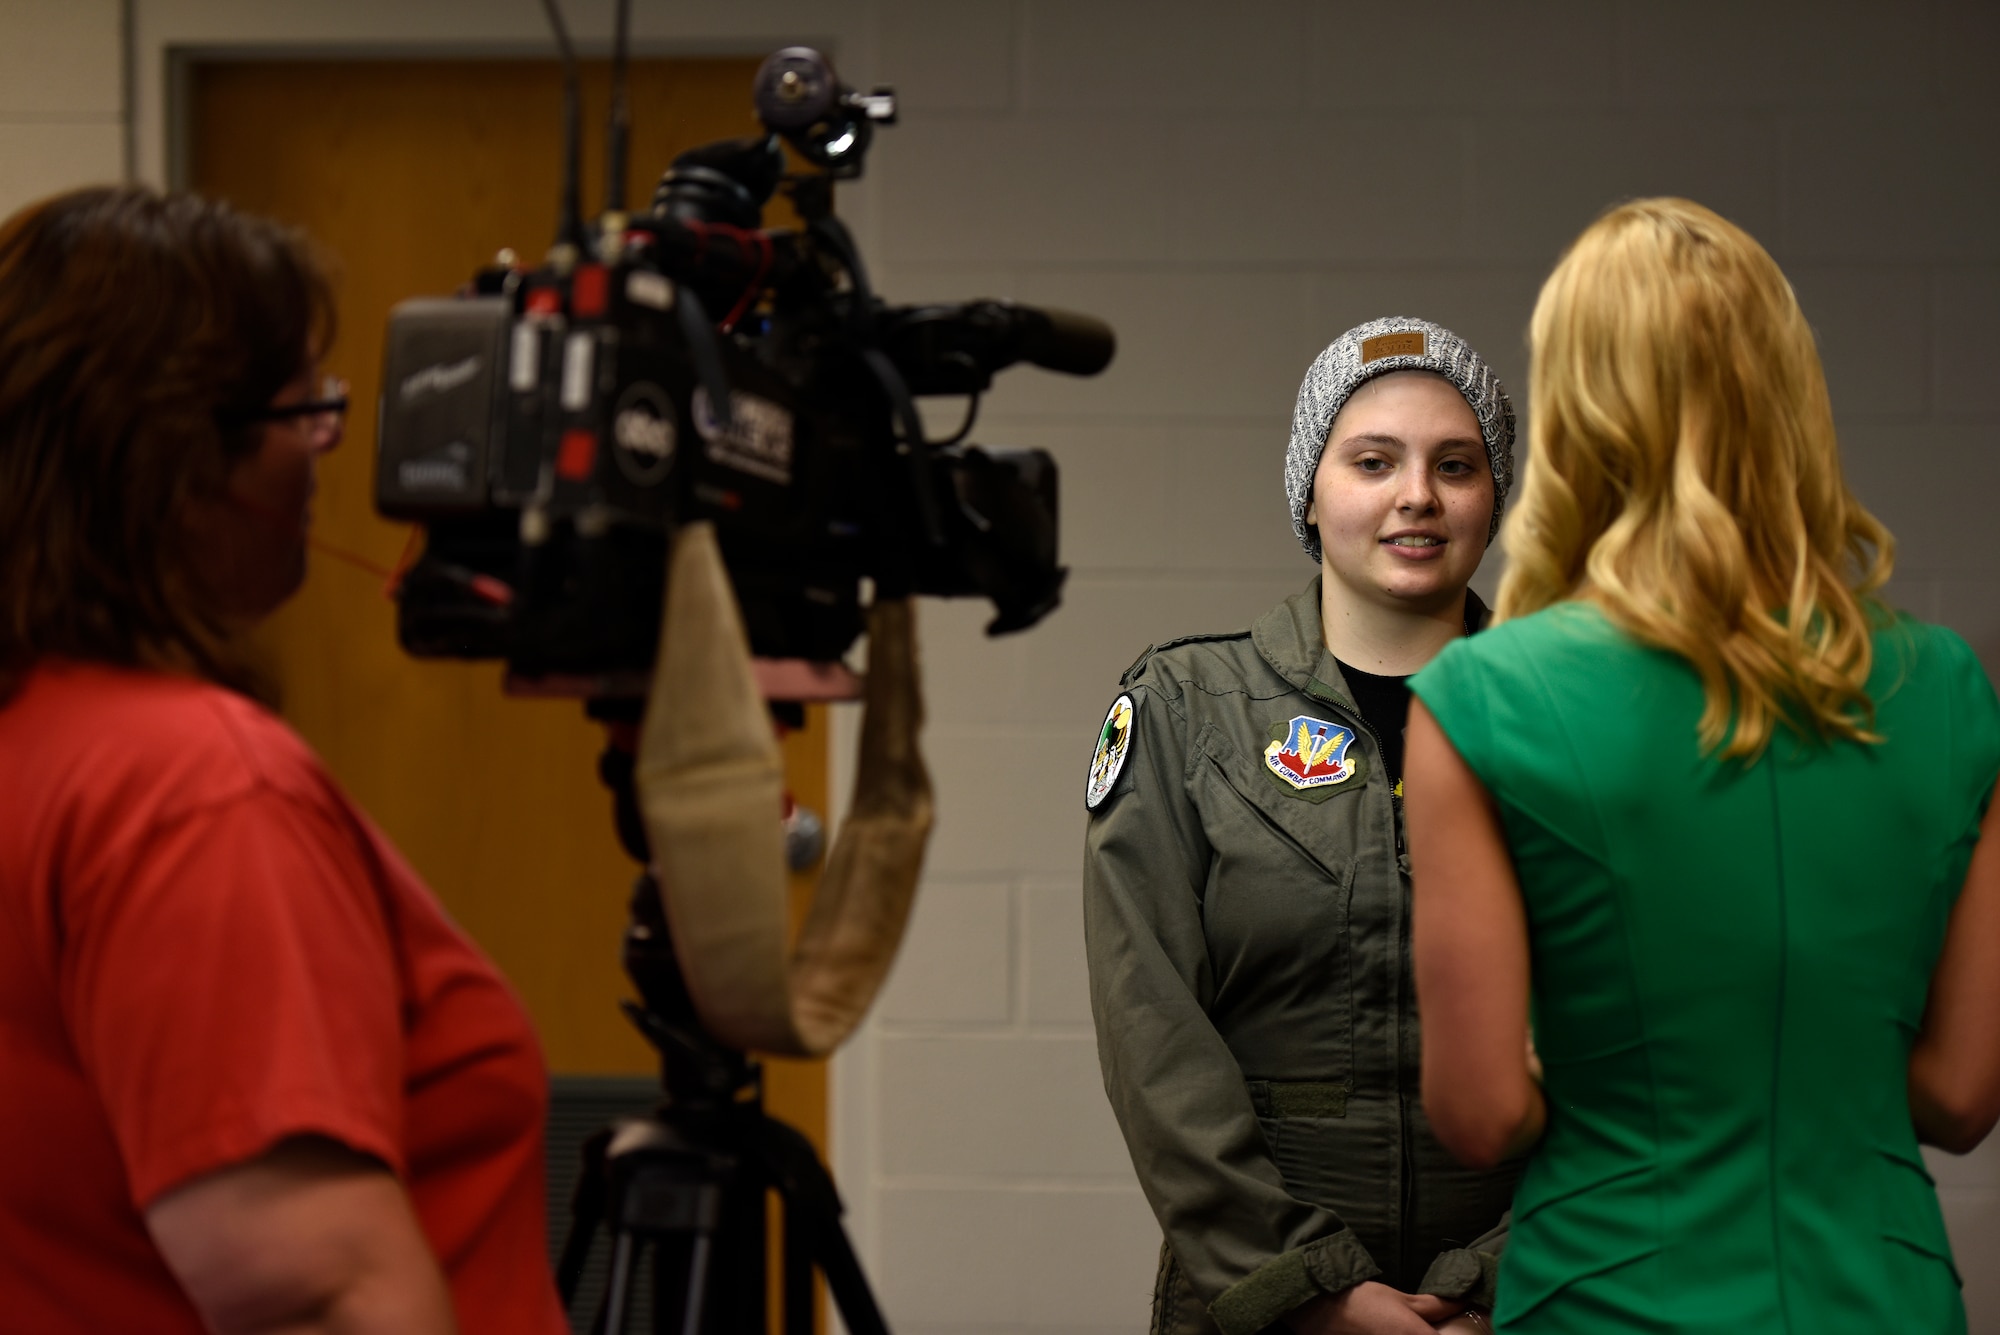 A local television crew interviews honorary 2nd Lt. Ashleigh Hunt during the Pilot for a Day event May 26, 2016 at the 180th Fighter Wing in Swanton, Ohio. The Pilot for a Day program is a way for the 180FW to support the local community by providing a fun-filled day for children and young adults living with chronic or life-threatening disease or illness. (U.S. Air National Guard photo by Staff Sgt. Shane Hughes)